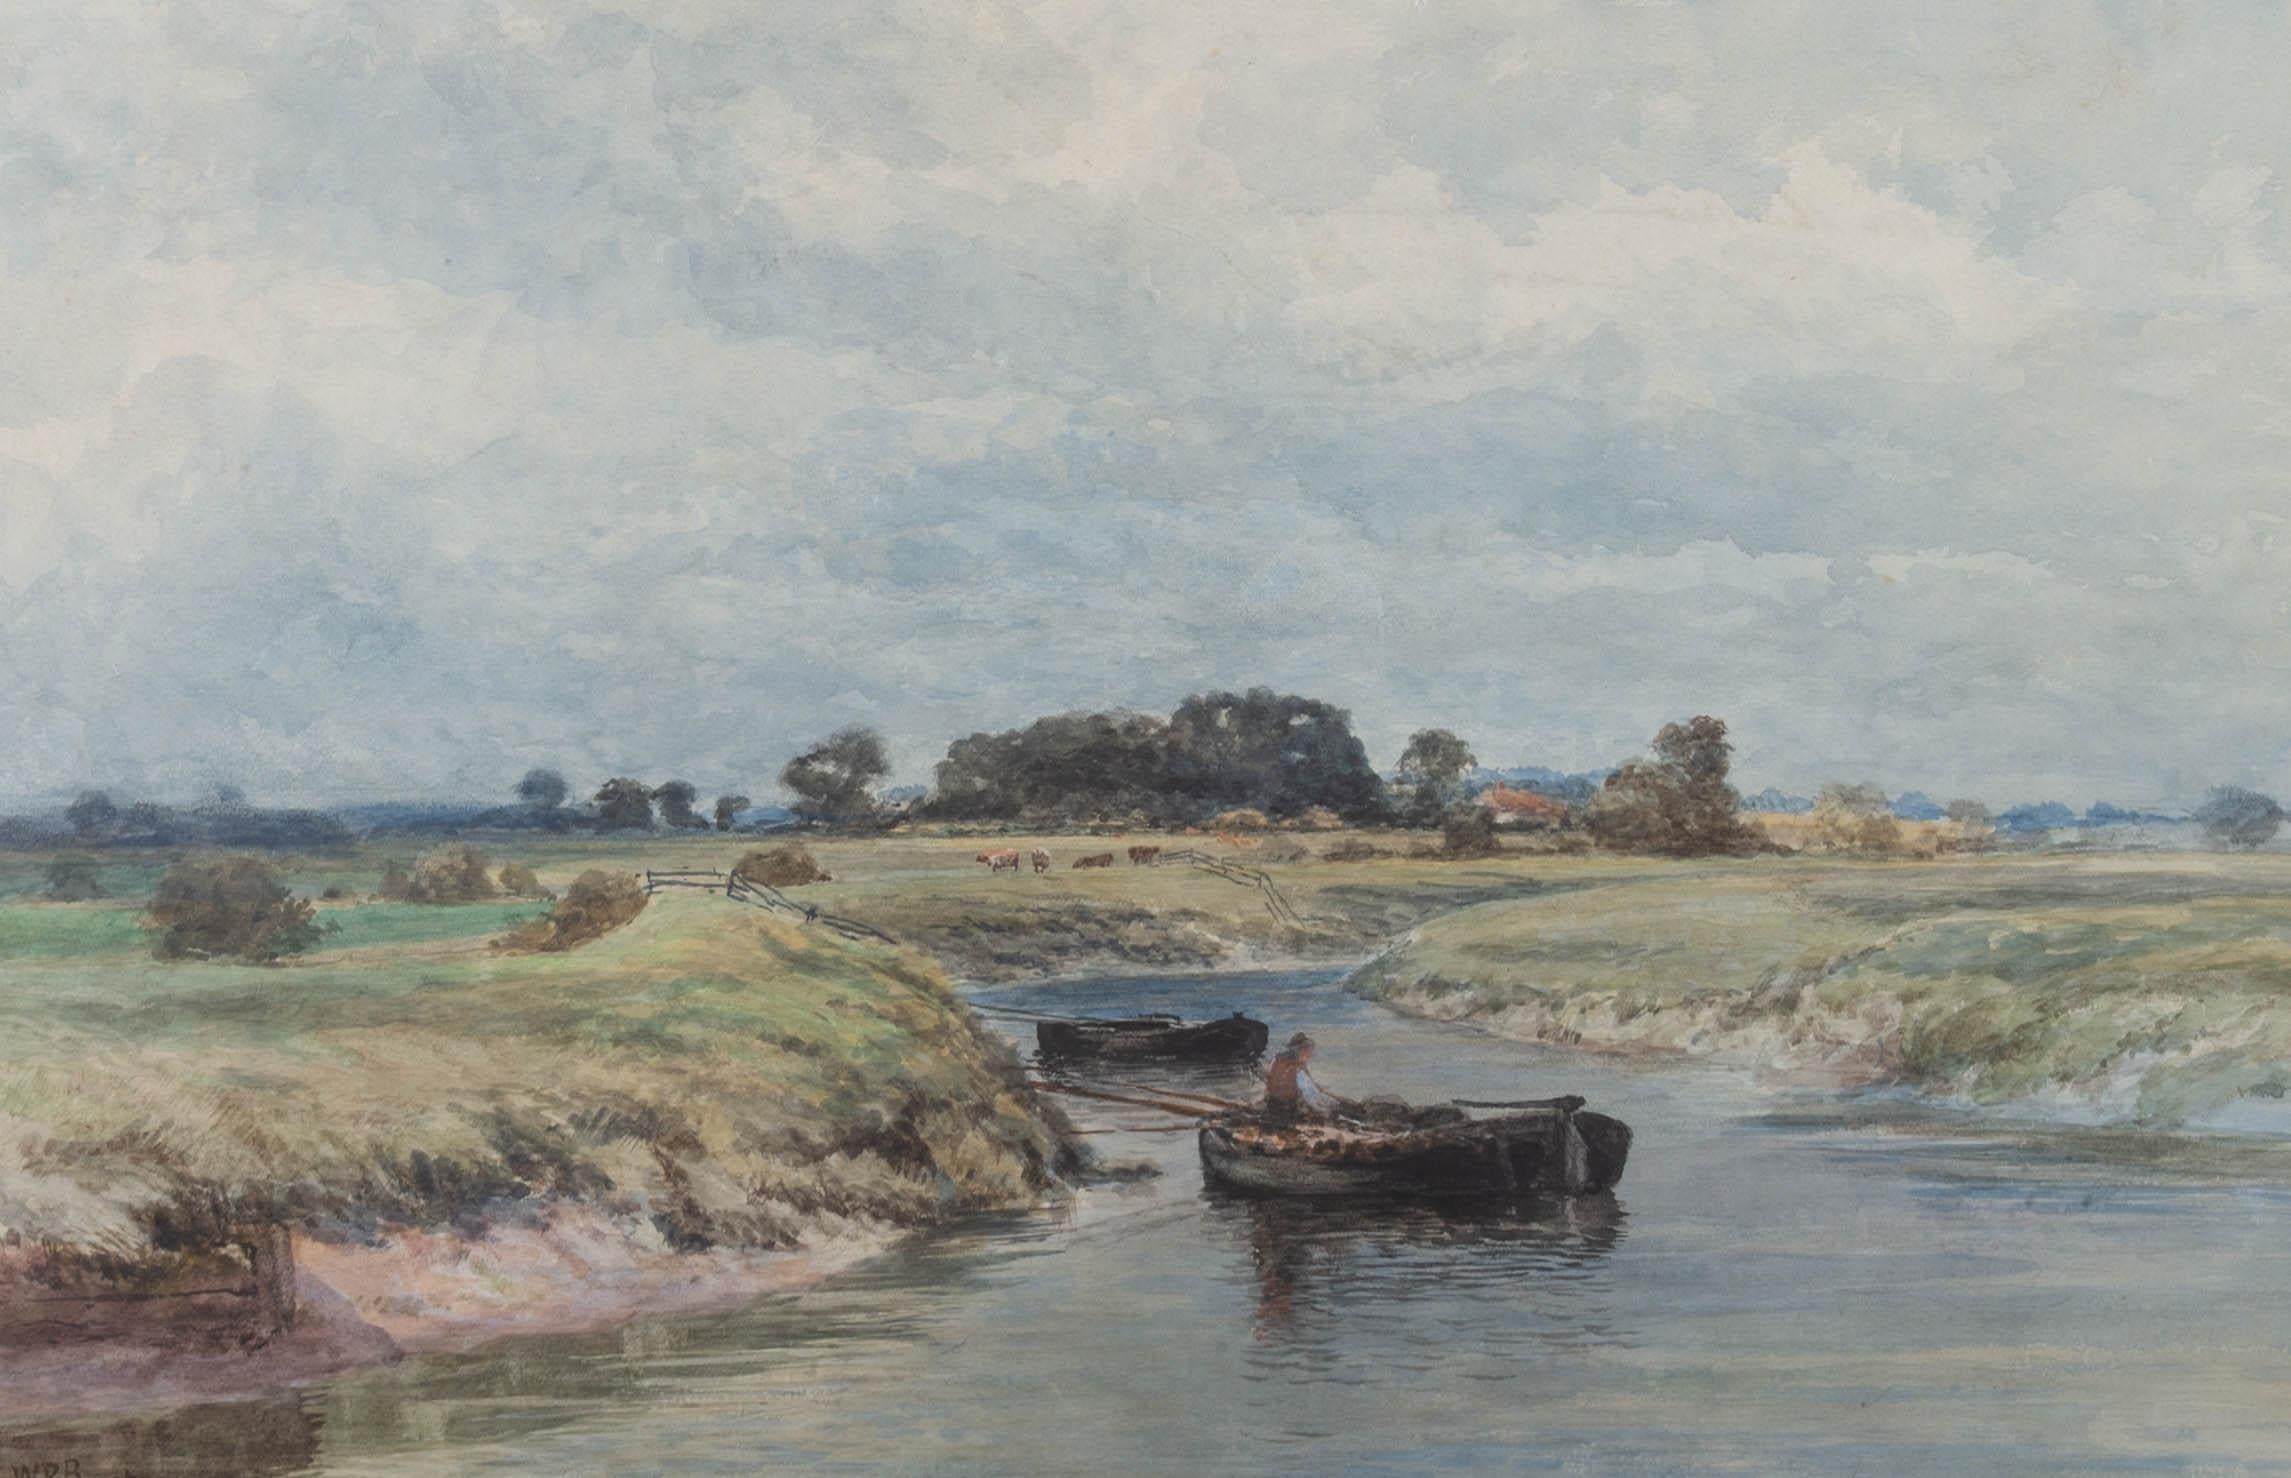 A peaceful landscape on the River Adur near Upper Beeding in West Sussex. Presented in a double wash line mount and a distressed gilt-effect wooden frame. Signed to the lower-left edge. The name and dates of the artist are also printed at the lower